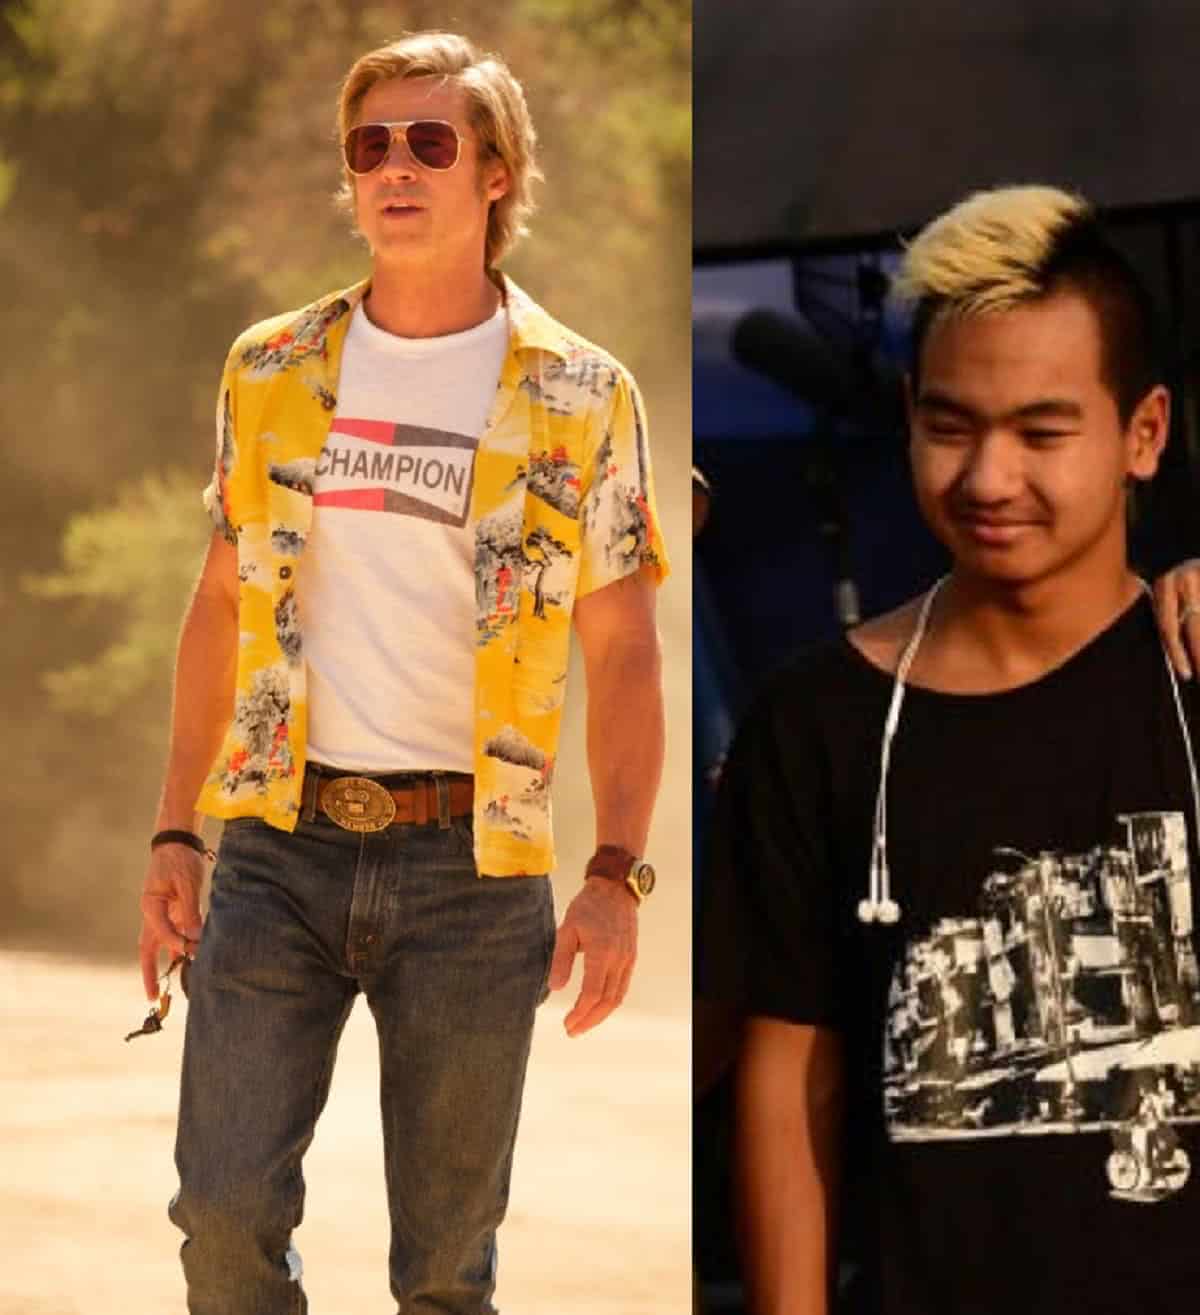 Brad Pitt in Once Upon a Time in Hollywood and Maddox Jolie Pitt in the first movie They Killed My Father.